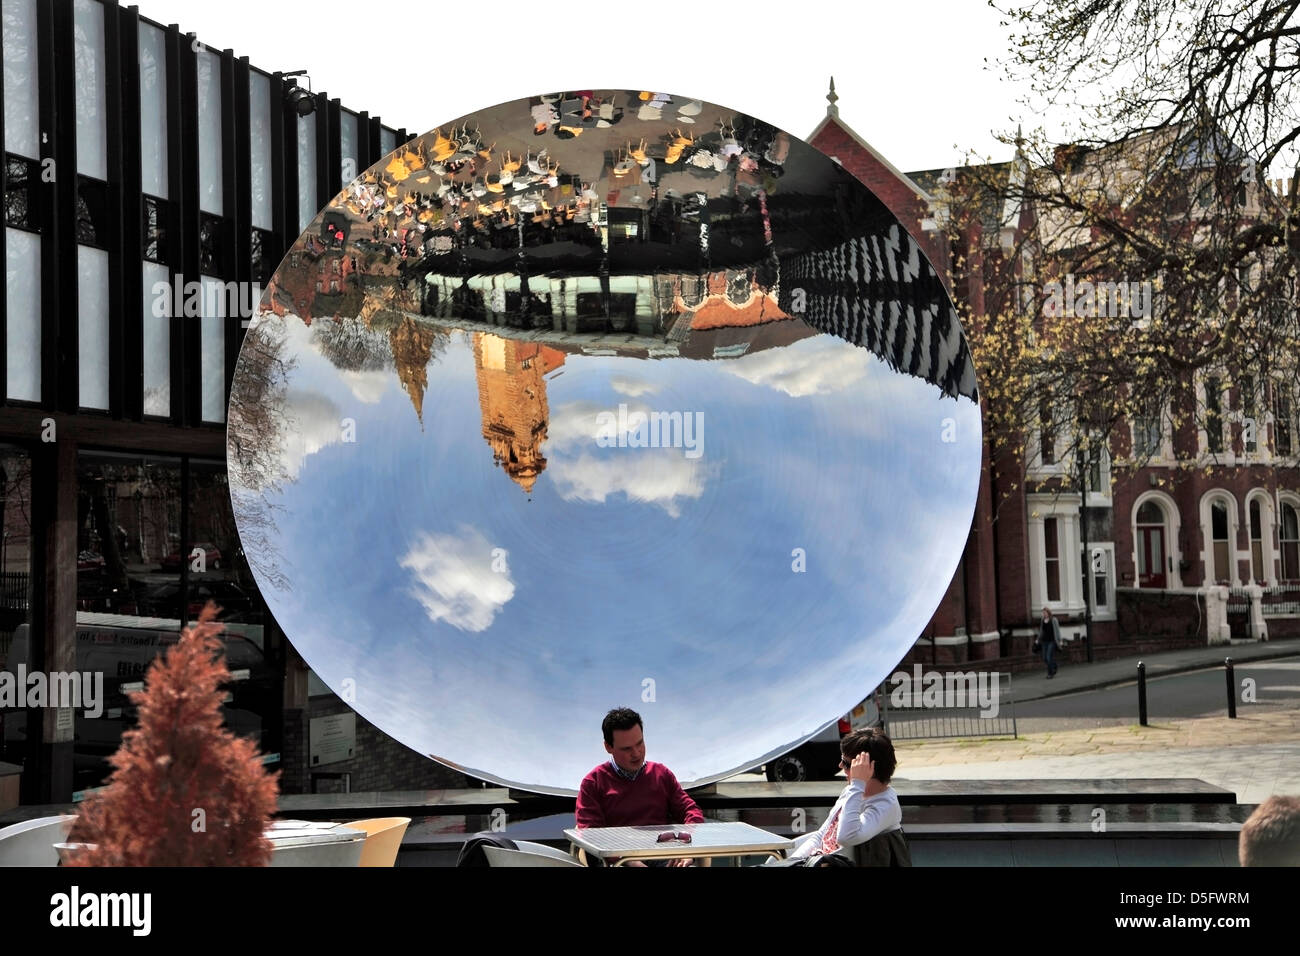 Nottingham Playhouse Theatre and the Sky Mirror, Nottingham city centre, Nottinghamshire, England, Britain; UK Stock Photo